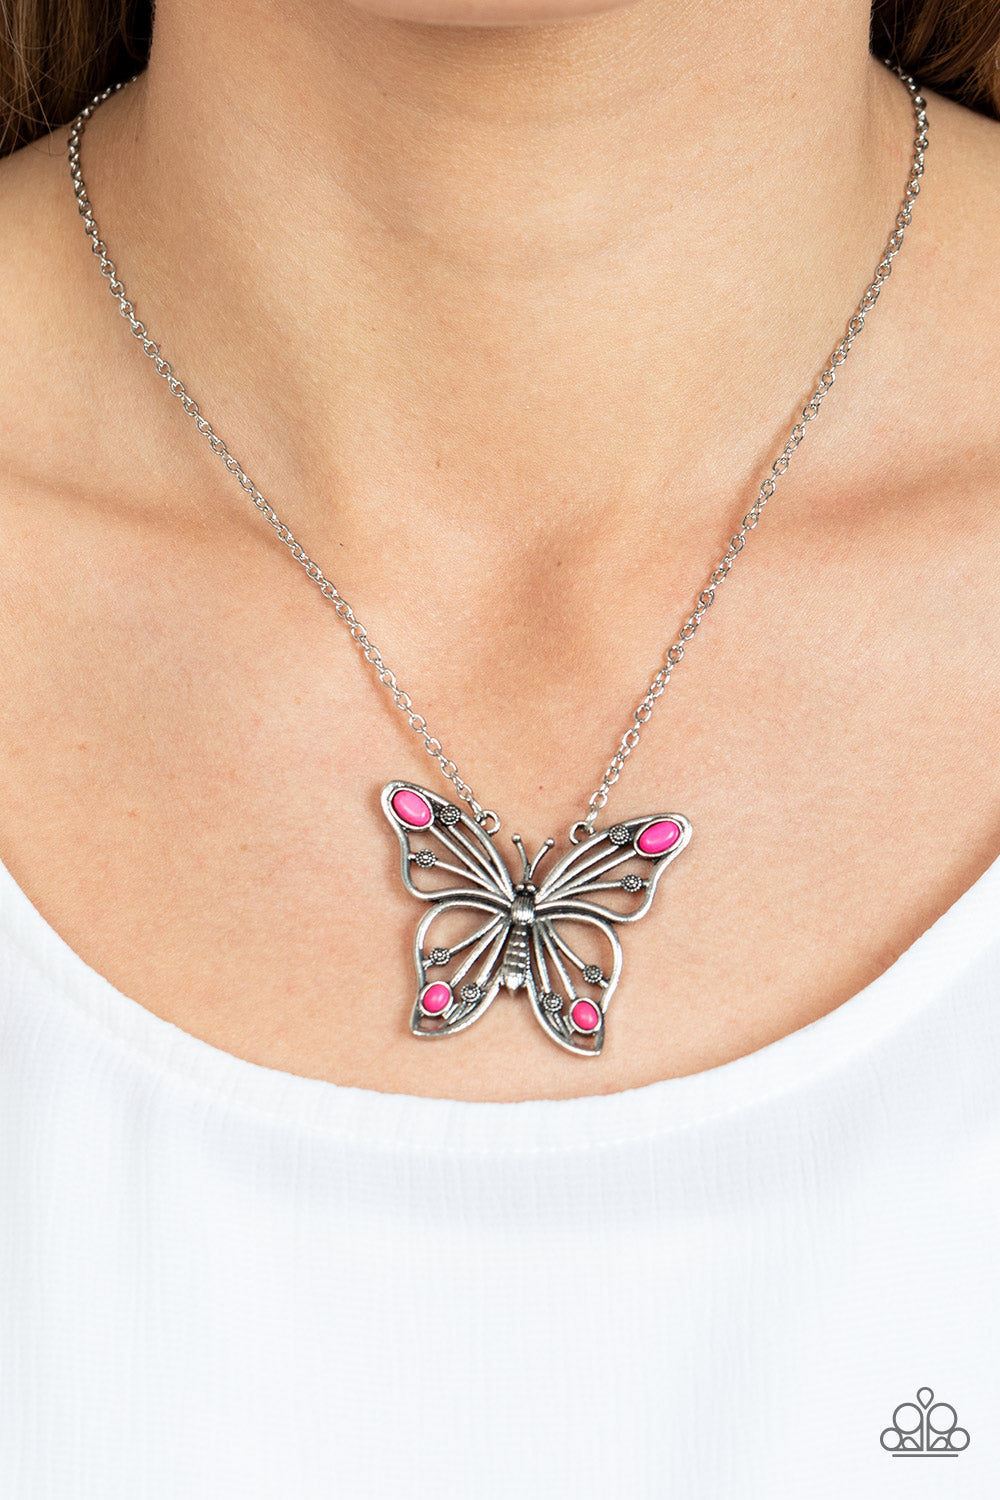 Paparazzi Accessories: Badlands Butterfly - Pink Necklace